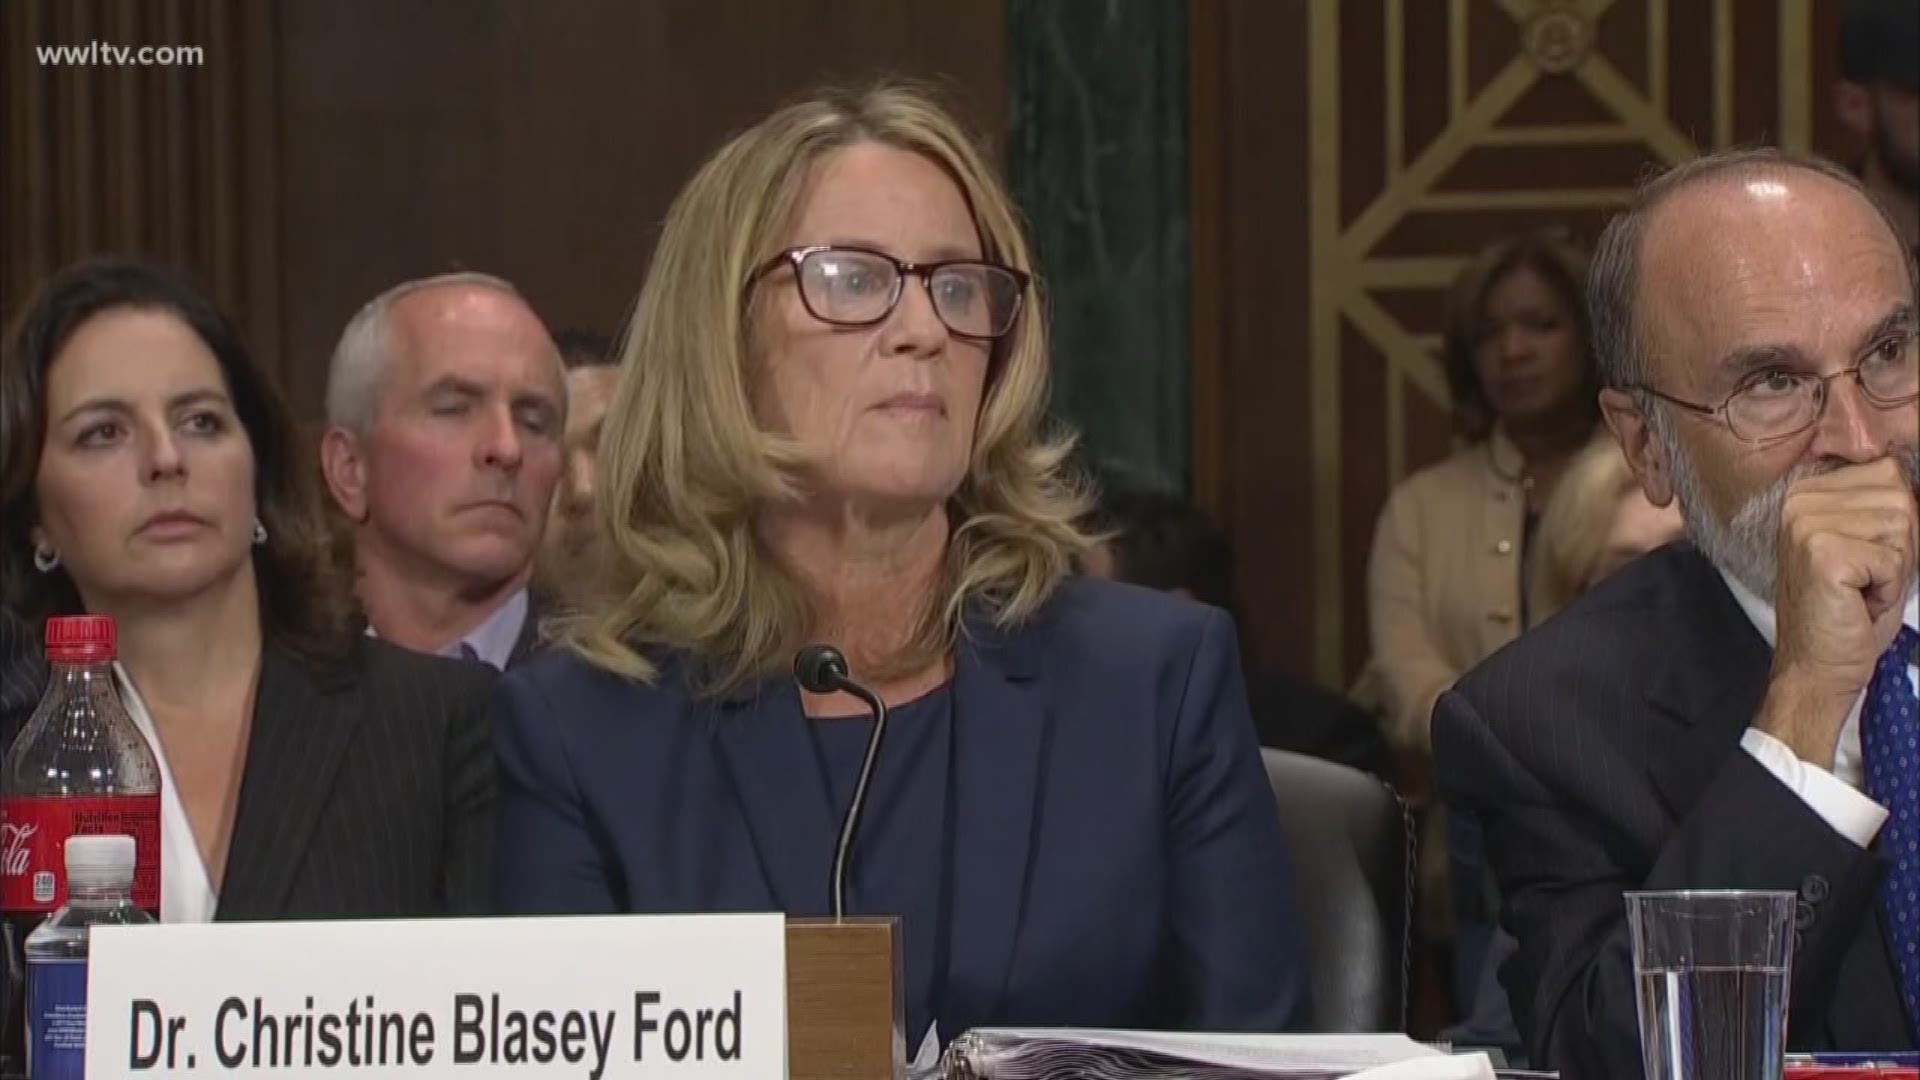 One of the questions asked several times this week by politicians and commentators alike is why didn't Dr. Christine Blasey Ford come forward sooner?